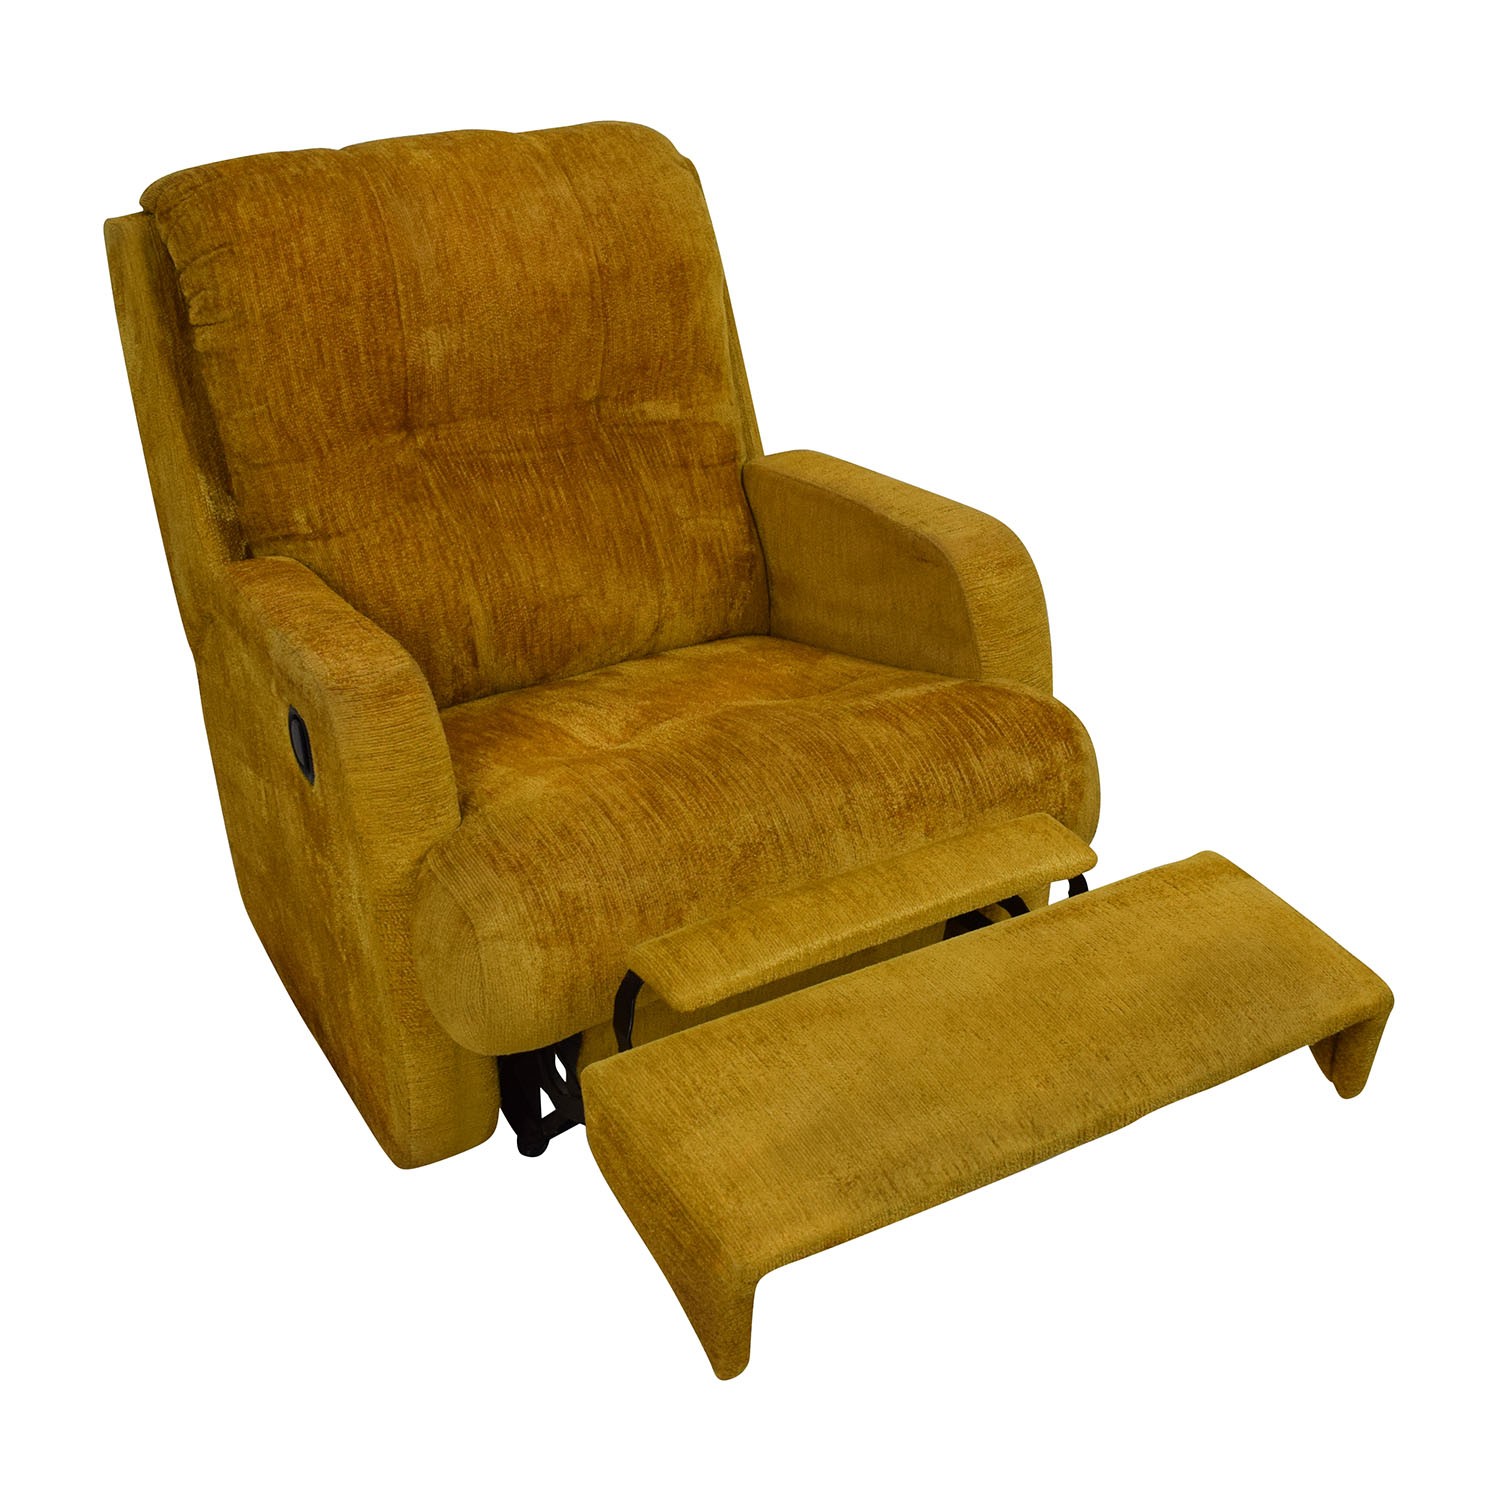 75 off unknown brand yellow recliner chair chairs